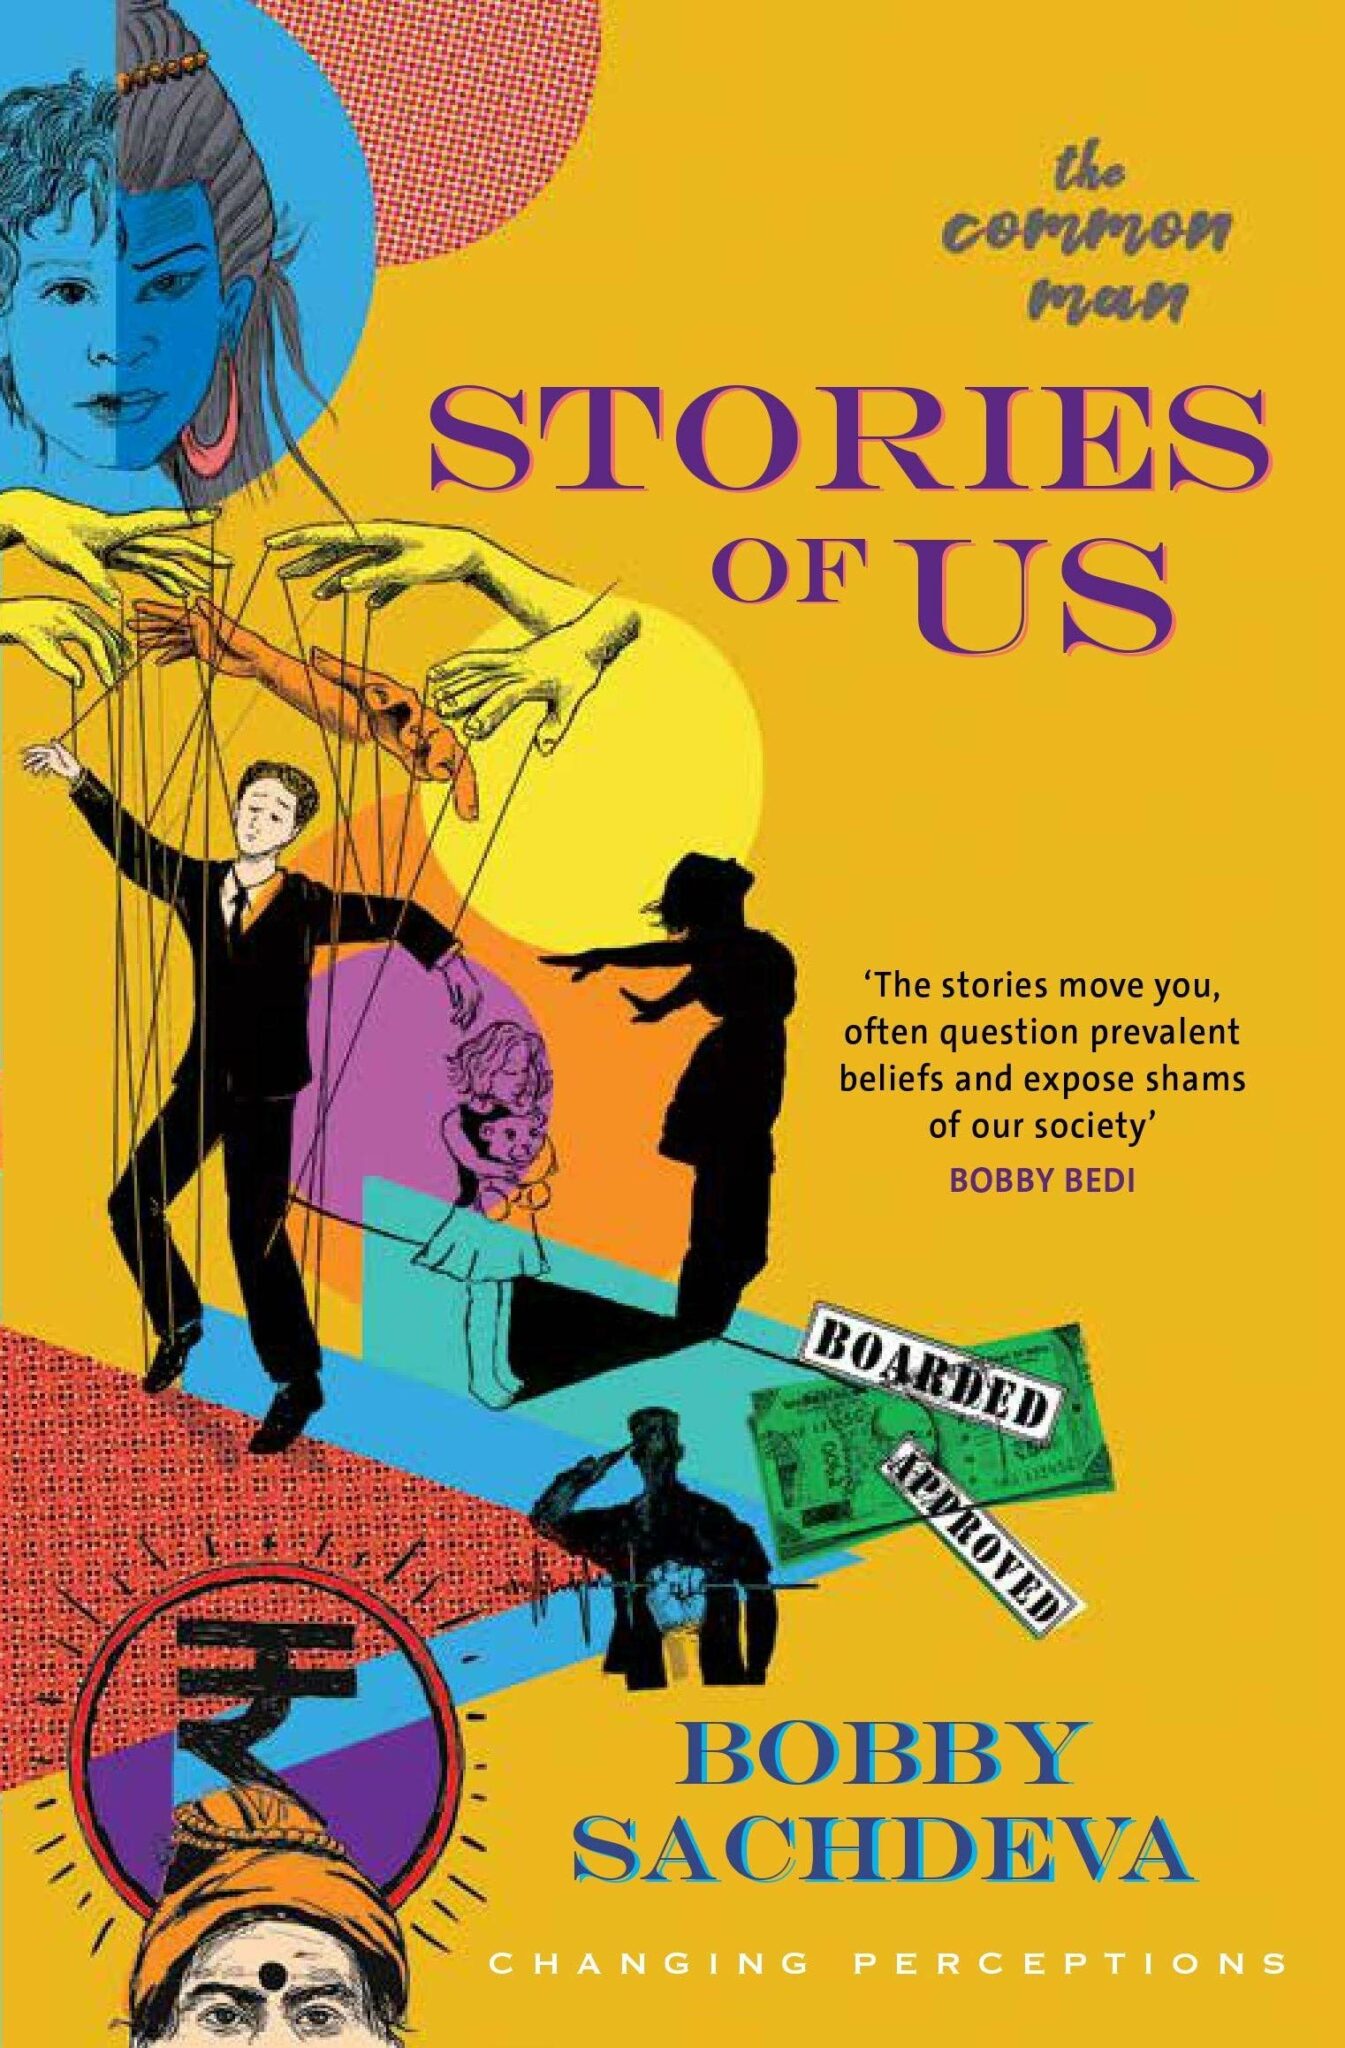 The Story of Us by Deb Caletti